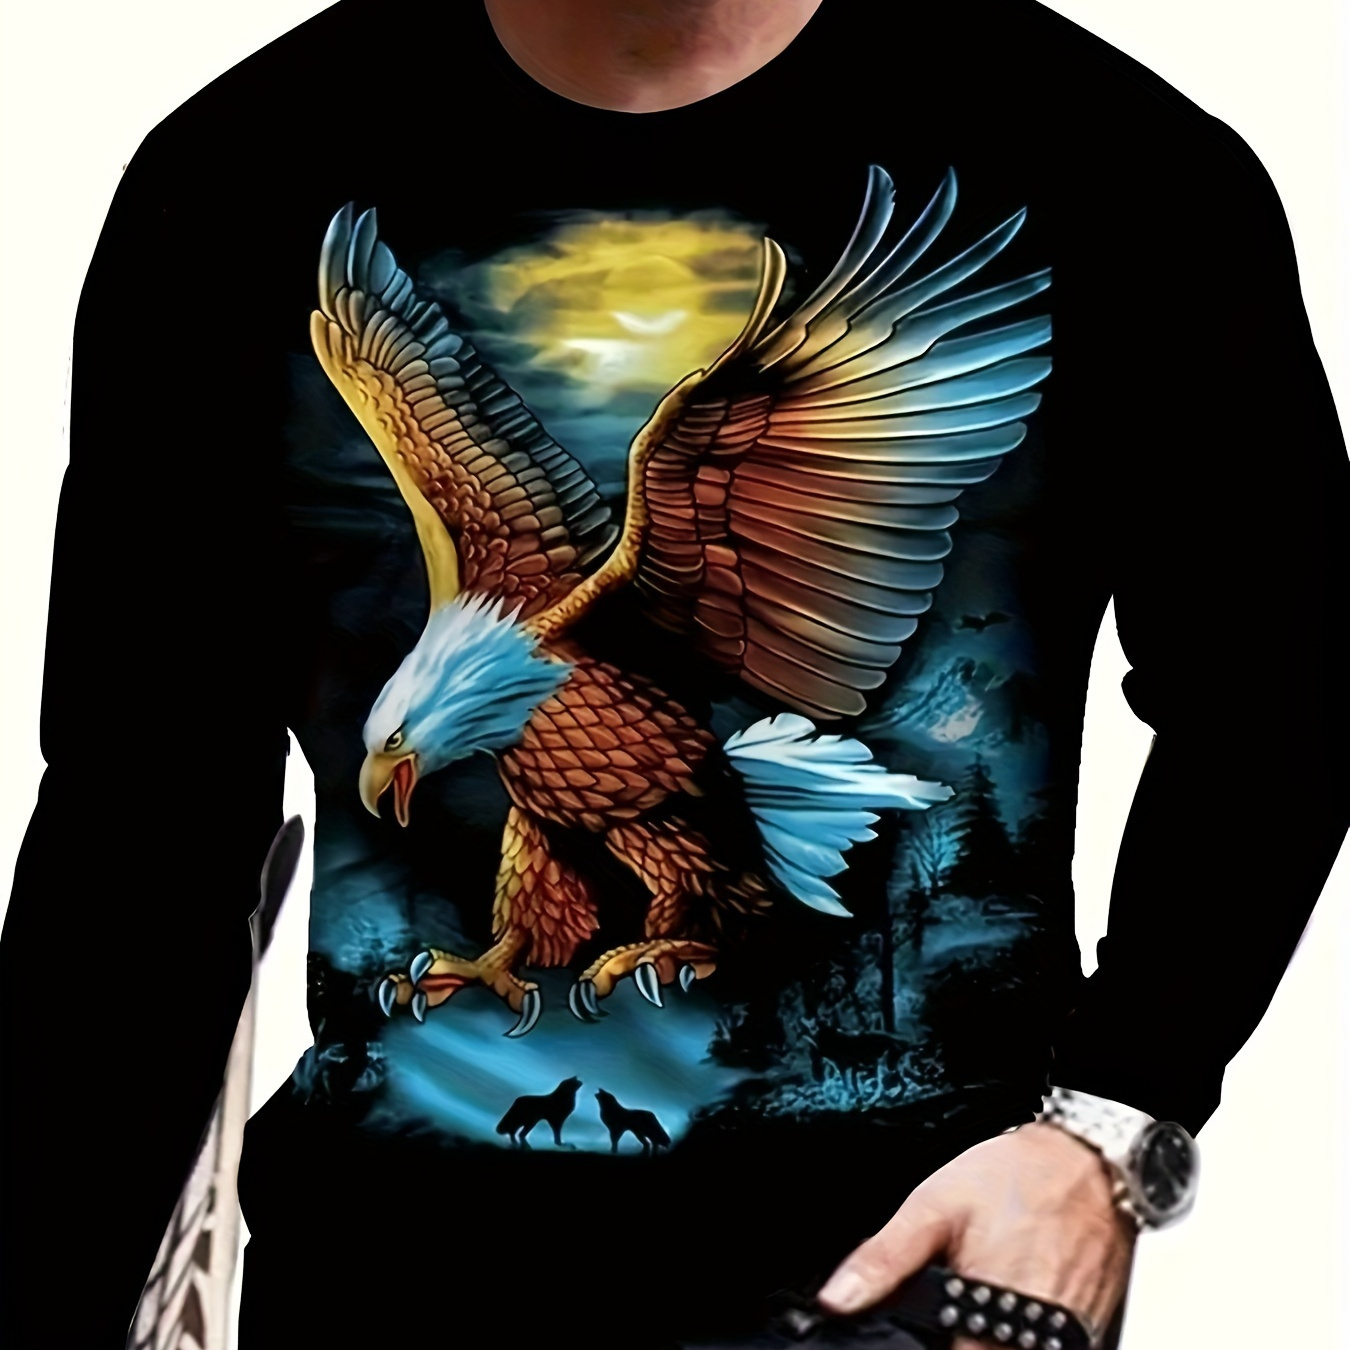 

Eagle Print, Men's Graphic Design Crew Neck Long Sleeve Active T-shirt Tee, Casual Comfy Shirts For Spring Summer Autumn, Men's Clothing Tops